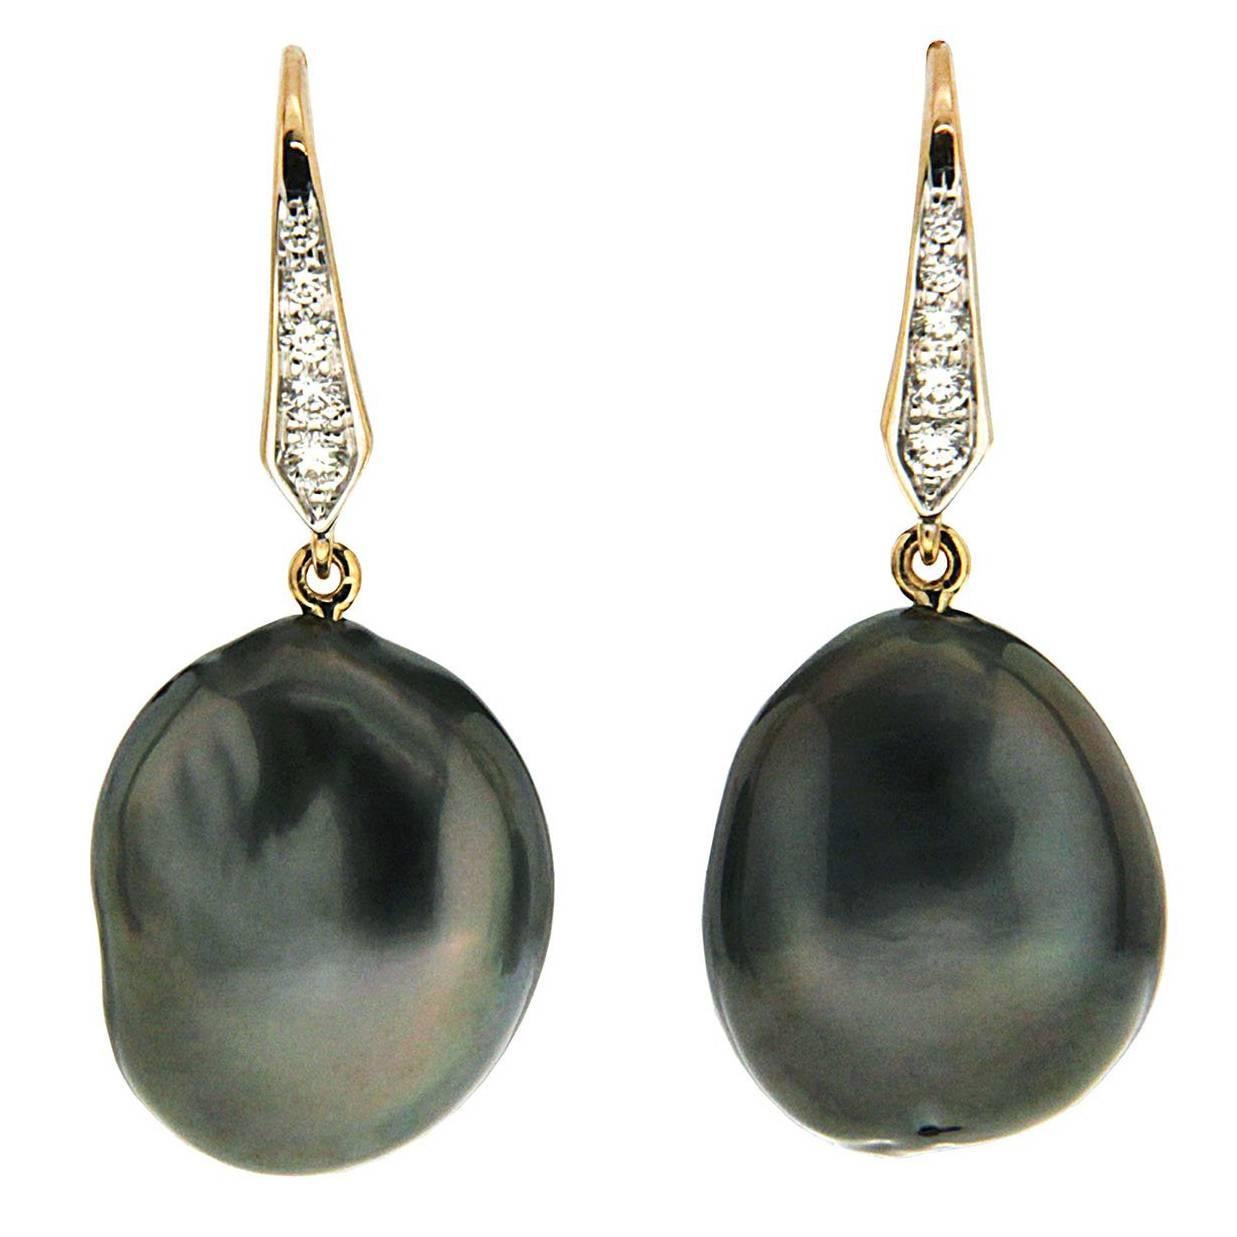 Valentin Magro Tahitian Tear Drop Pearl Earrings with Diamond Lever Back